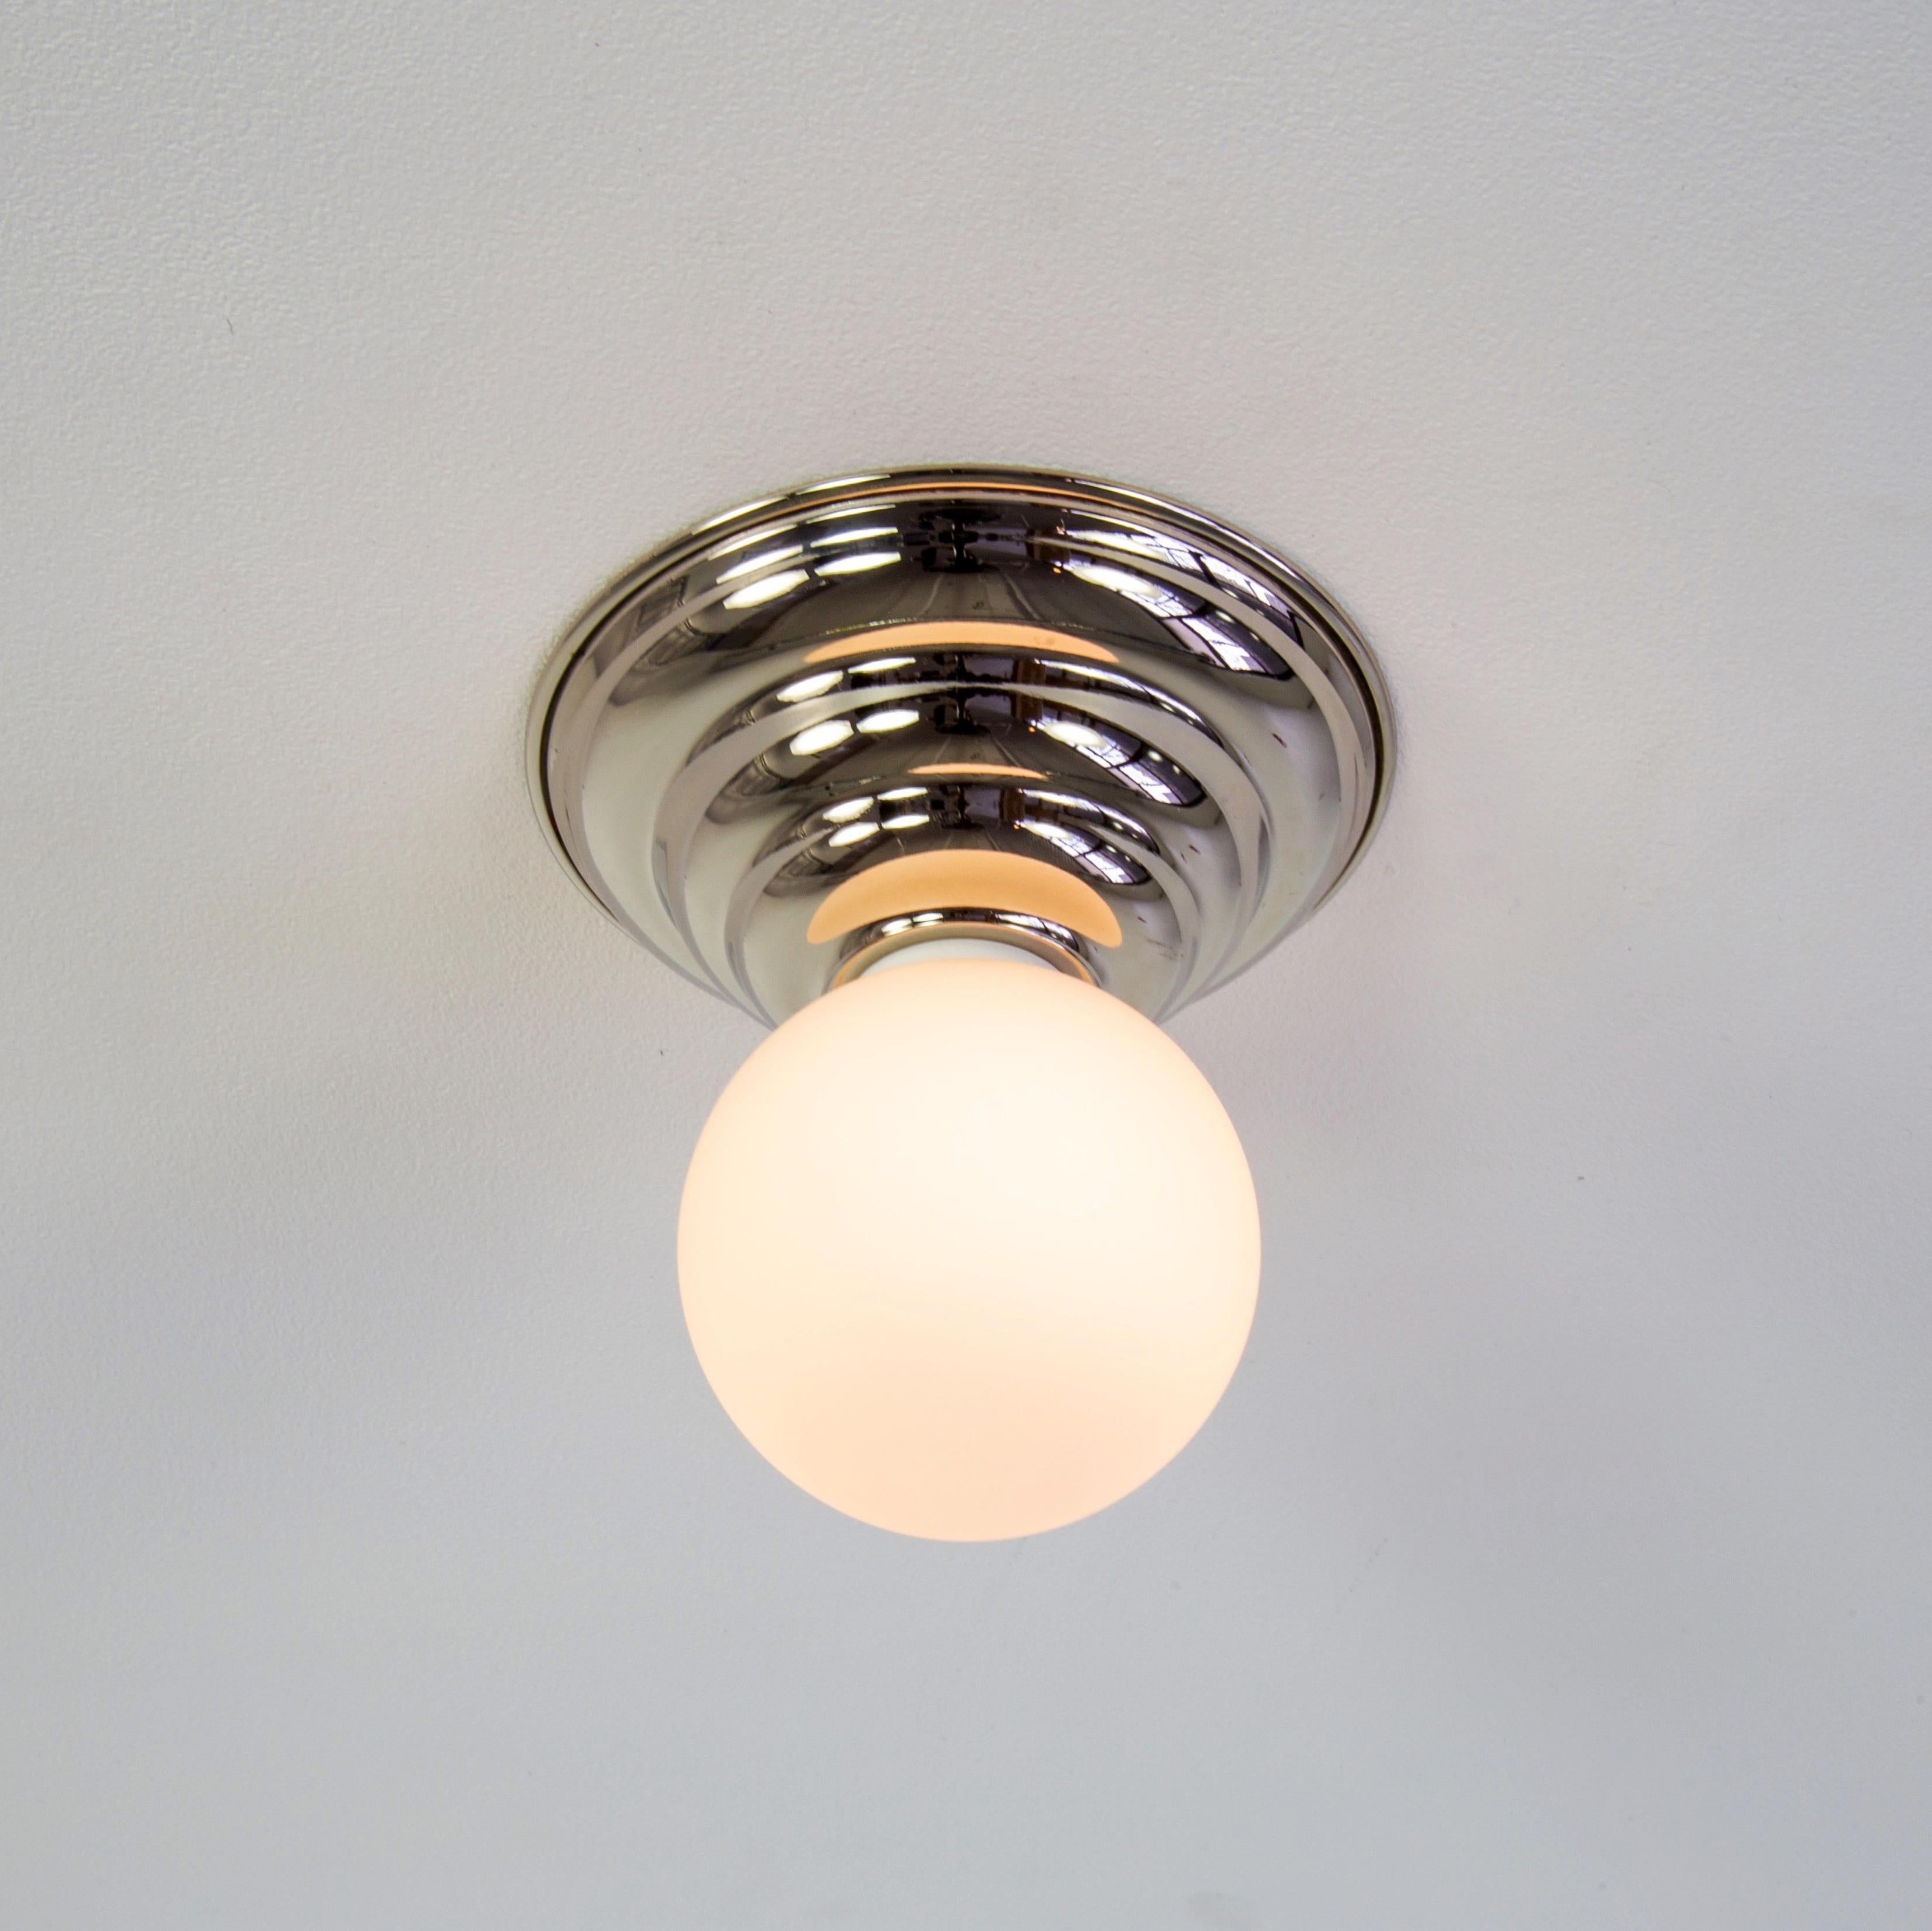 Hive Flush Mount by Research.Lighting, Polished Nickel, In Stock In New Condition For Sale In Brooklyn, NY